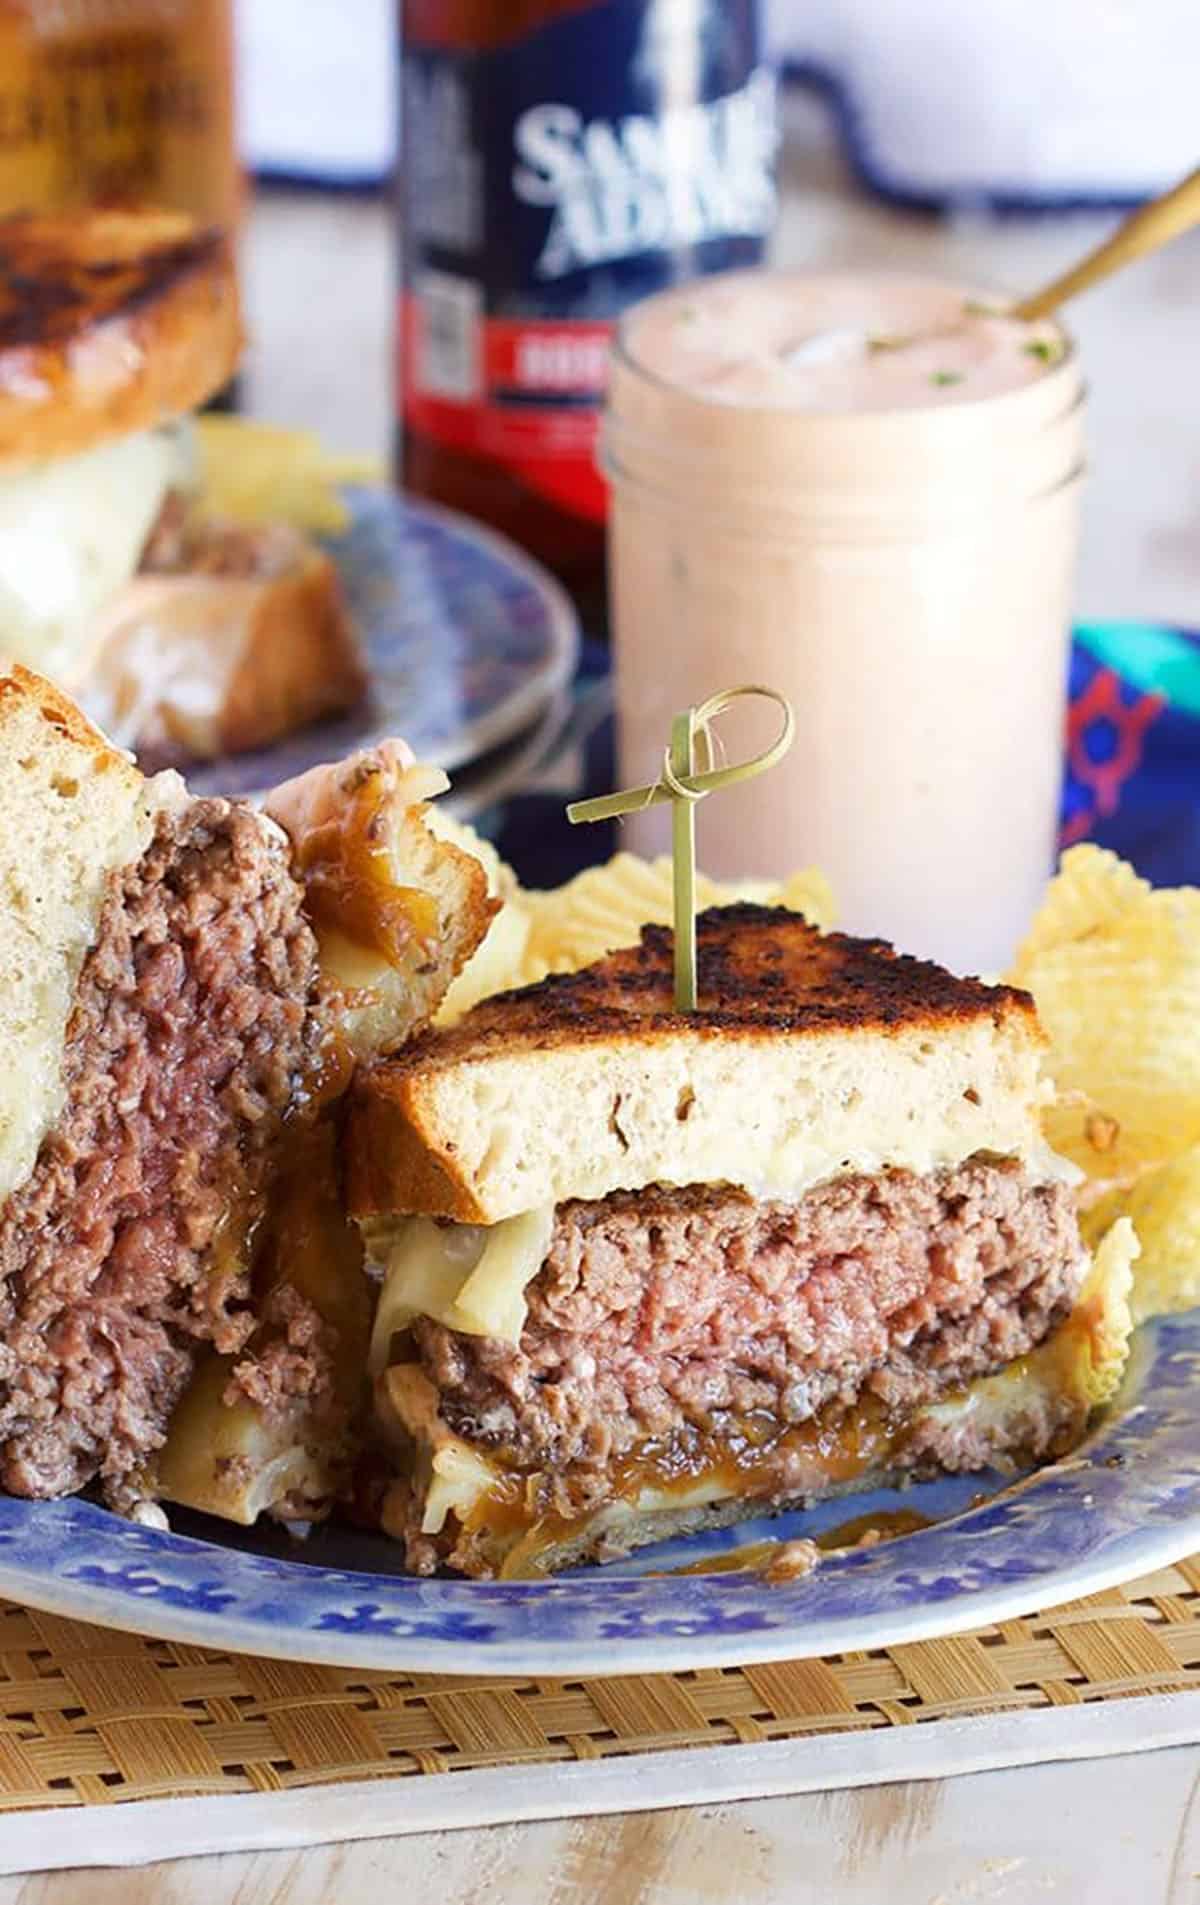 Patty Melt Sandwich cut in half and arranged on a blue plate with a jar of dressing in the background.